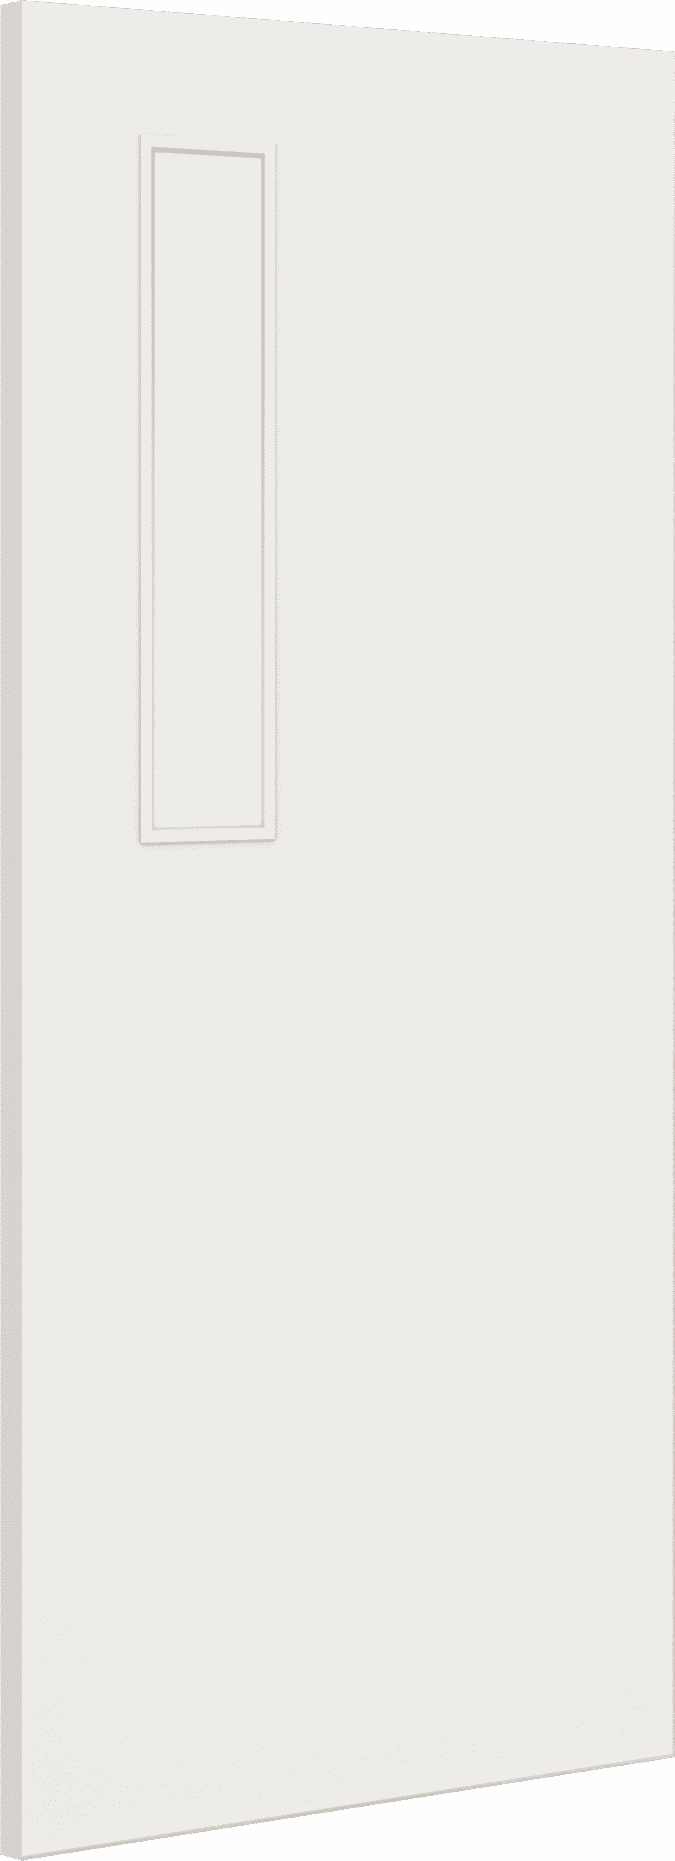 2040mm x 926mm x 44mm Architectural Paint Grade White 08 Clear Glazed Fire Door Blank